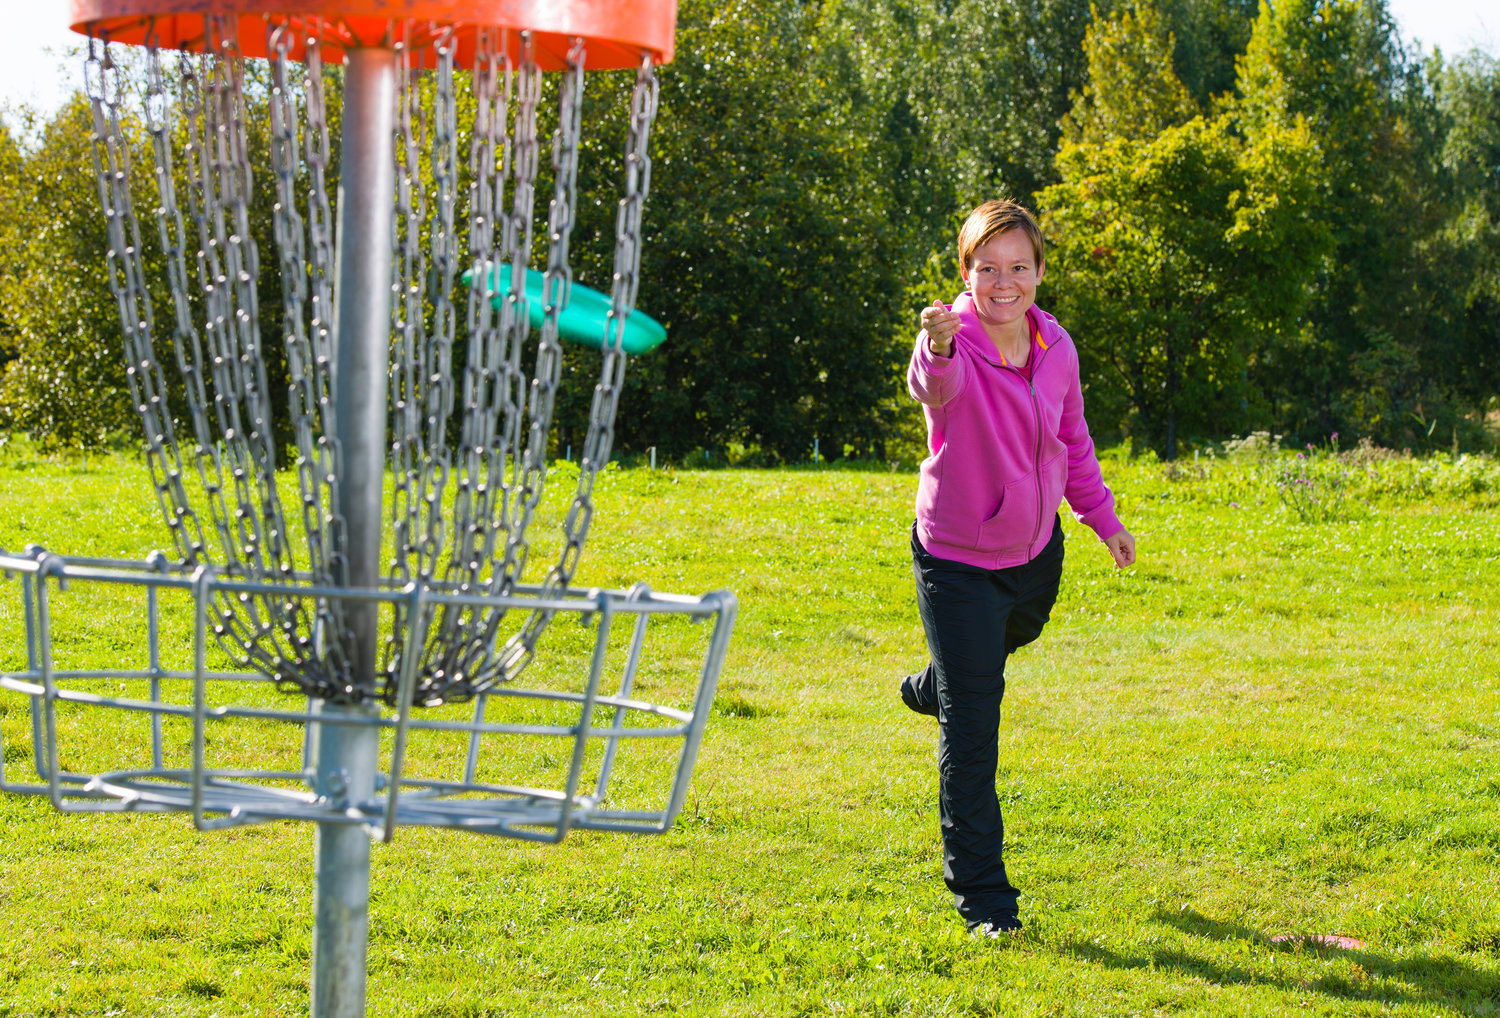 This woman is playing disc golf on one of the "more than 9,800" courses worldwide, according to The Professional Disc Golf Association.